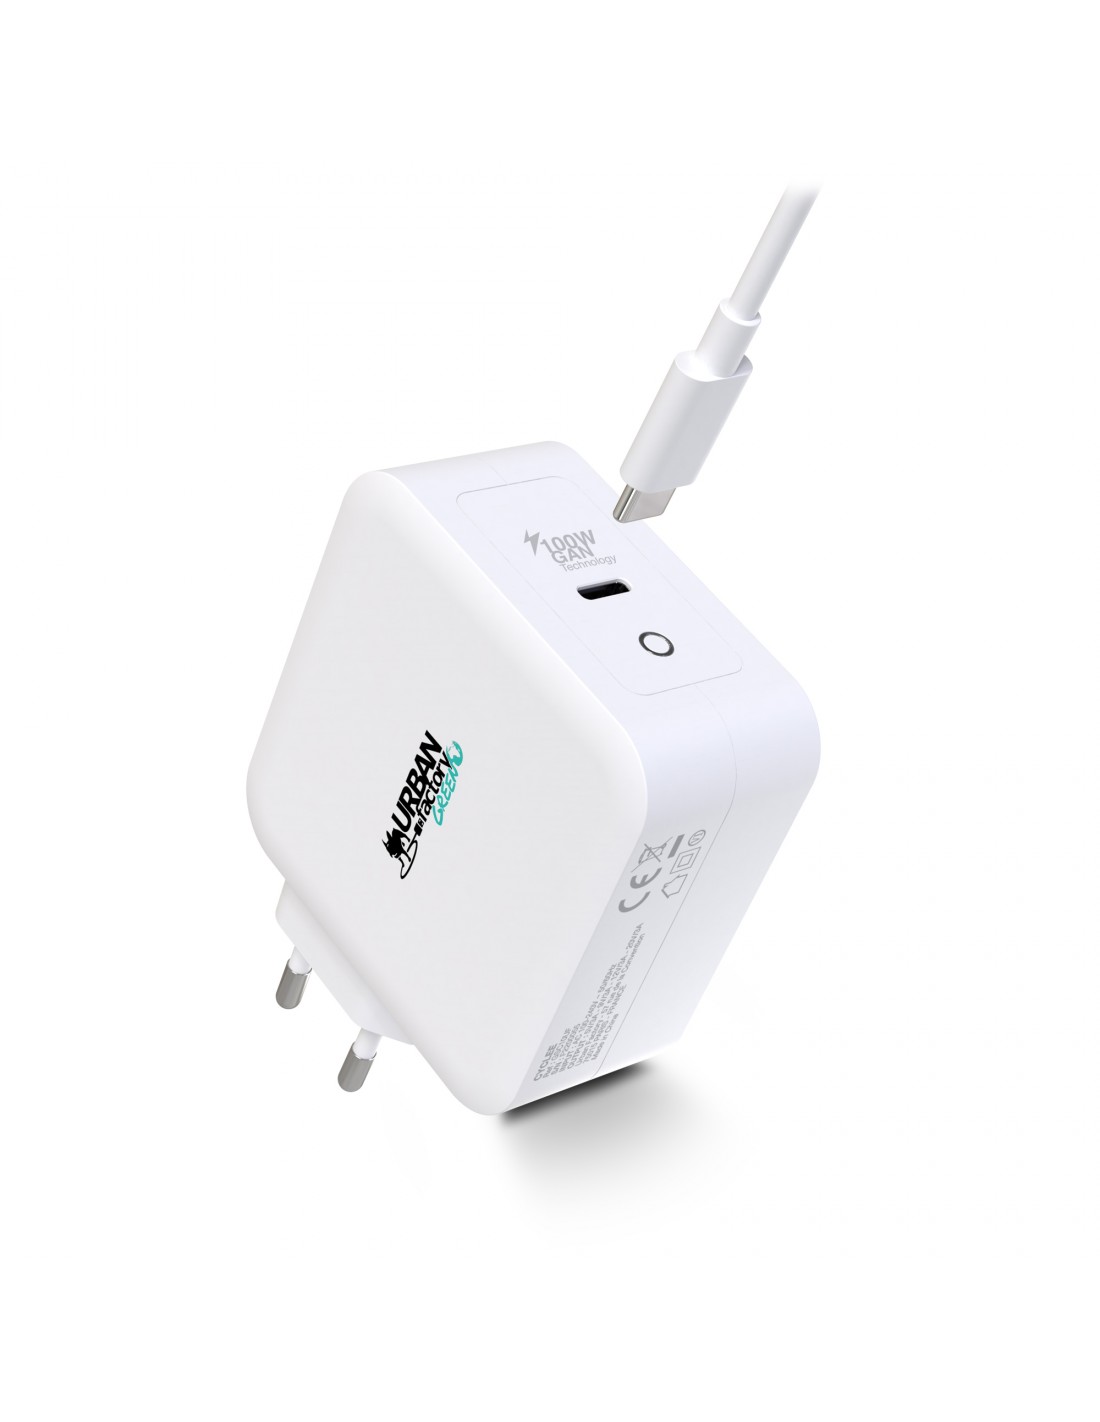 Chargeur Multiprise USB Urban Factory - Charge Rapide (CDF01UF) prix Maroc